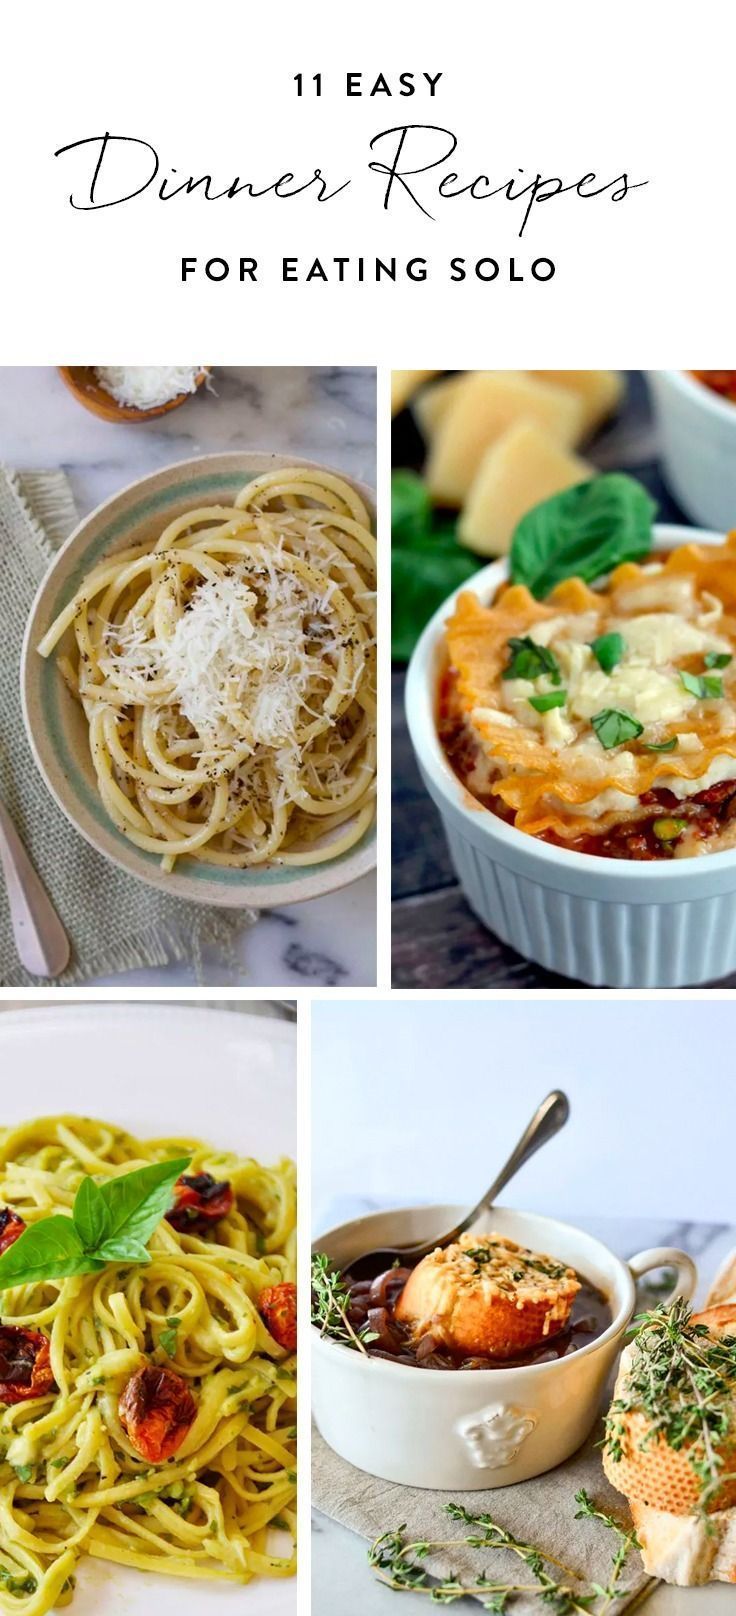 13 healthy recipes For One easy
 ideas